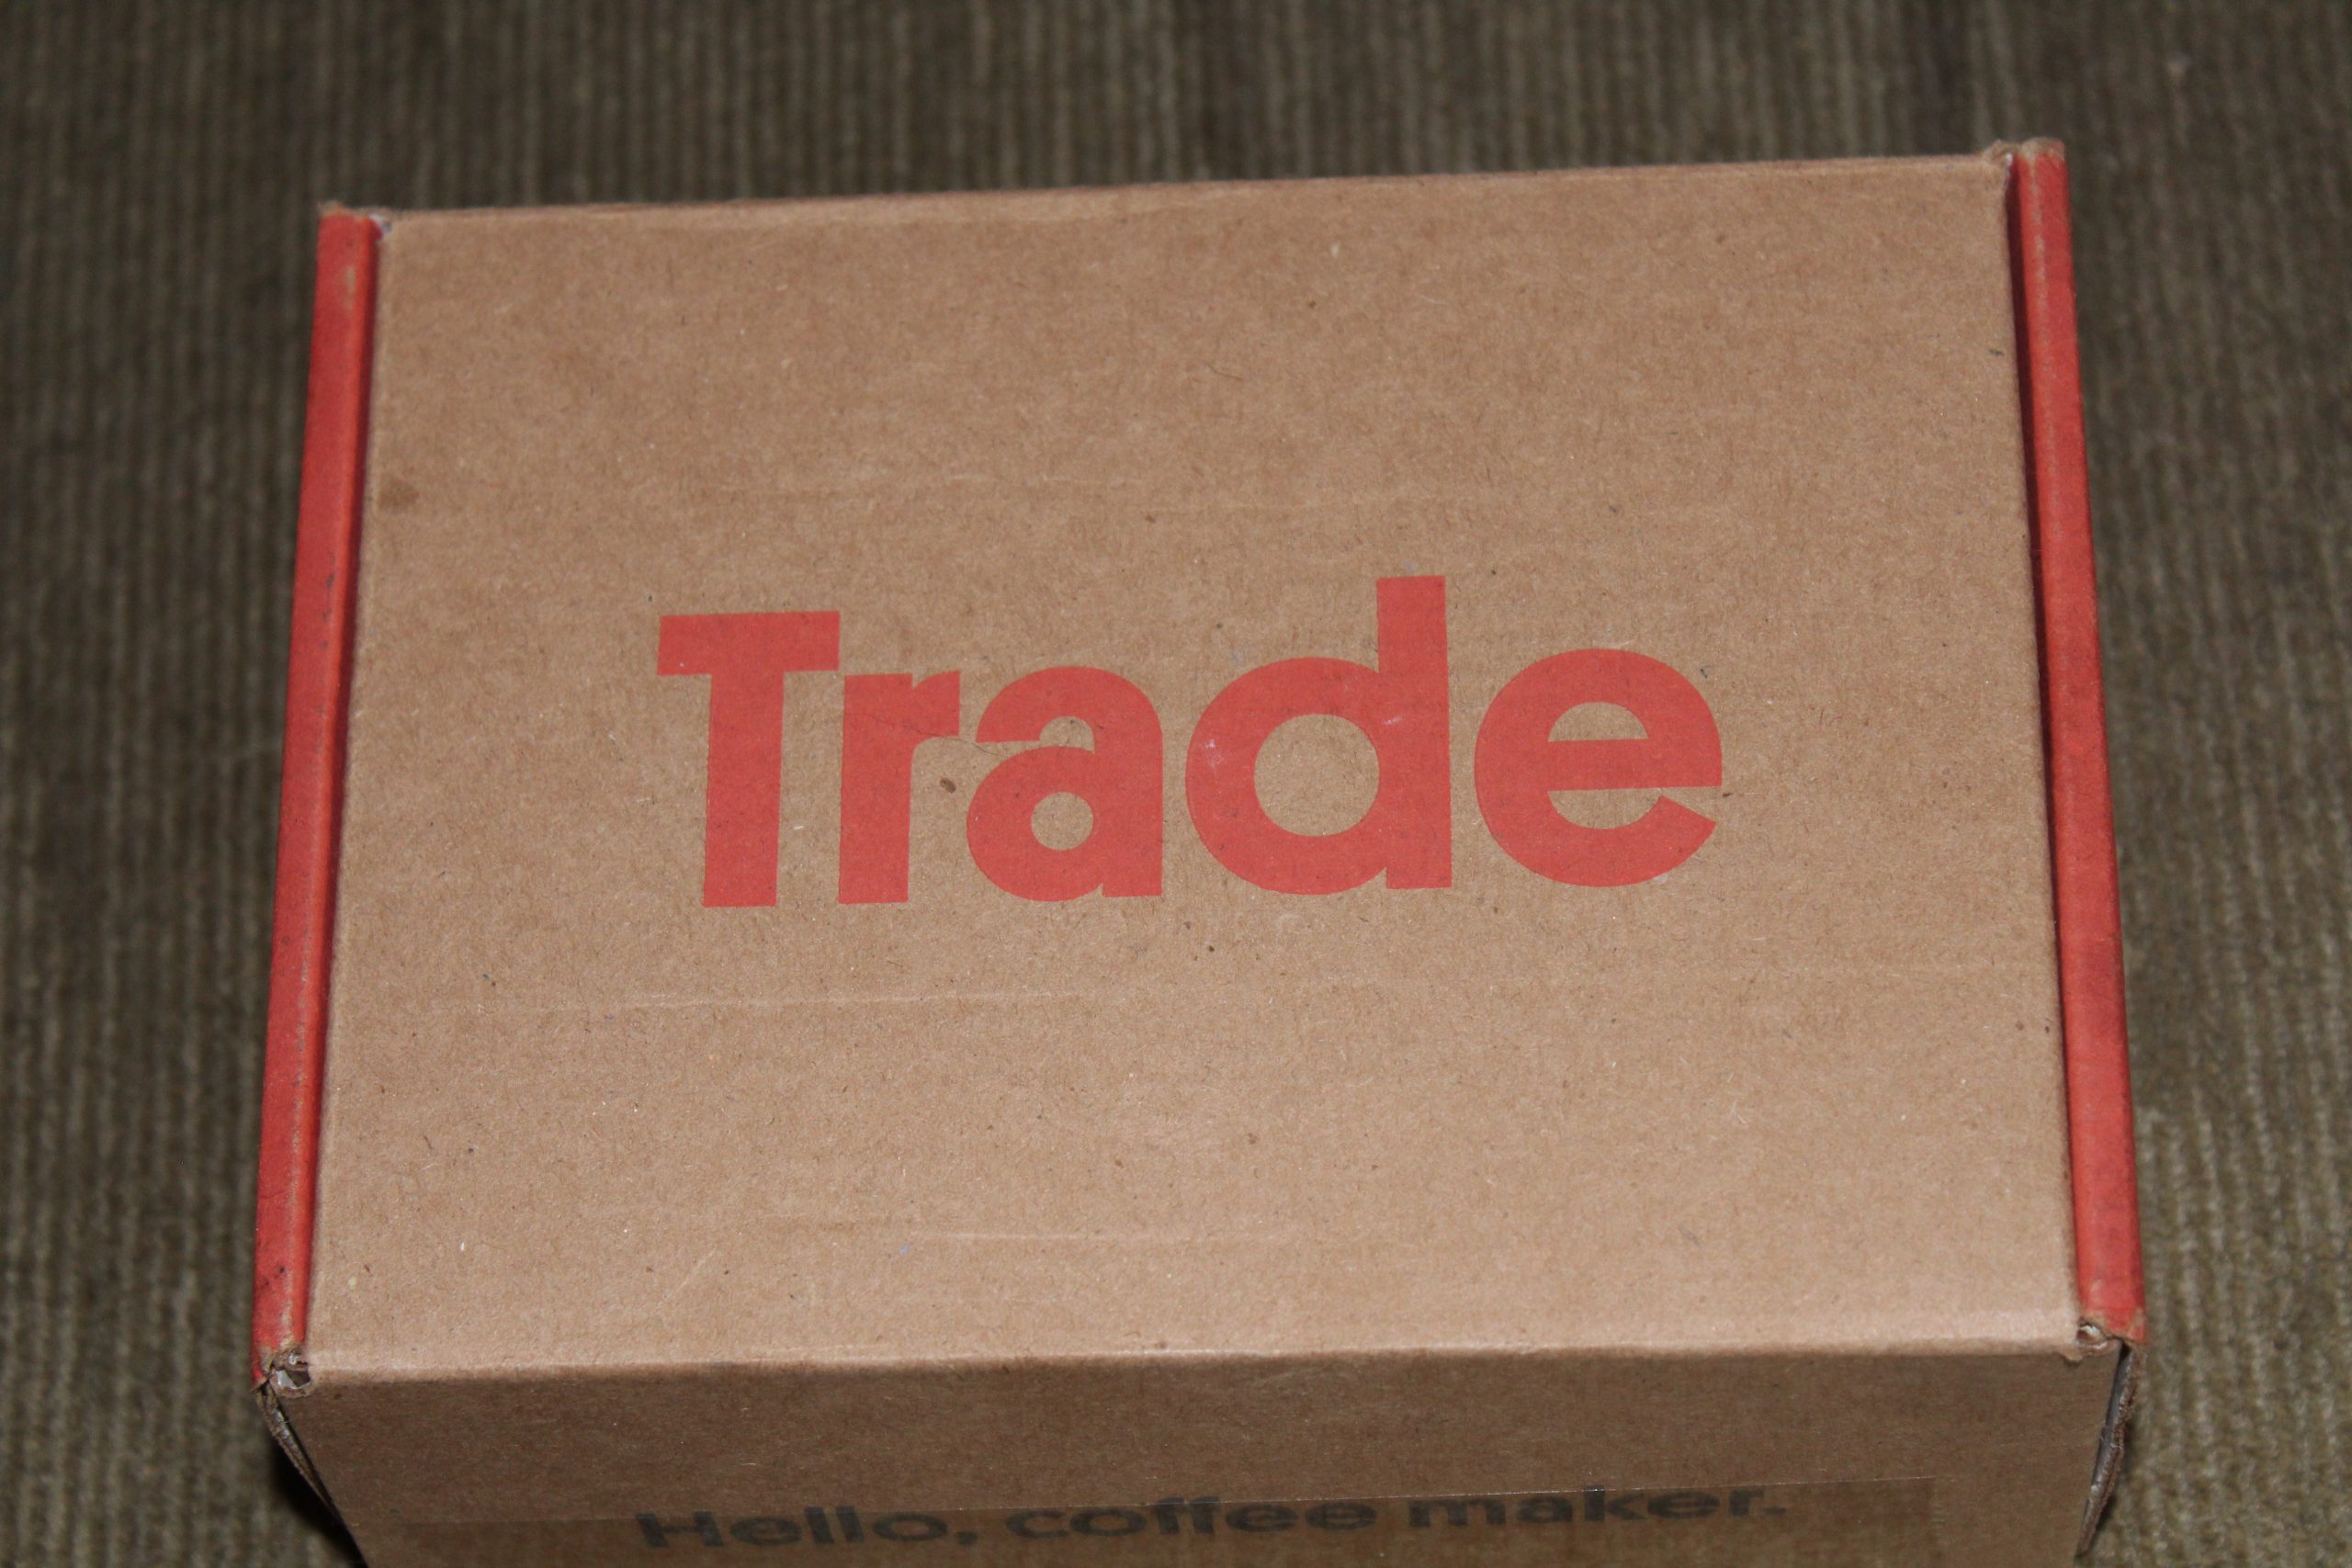 Trade Coffee Subscription Service #Review